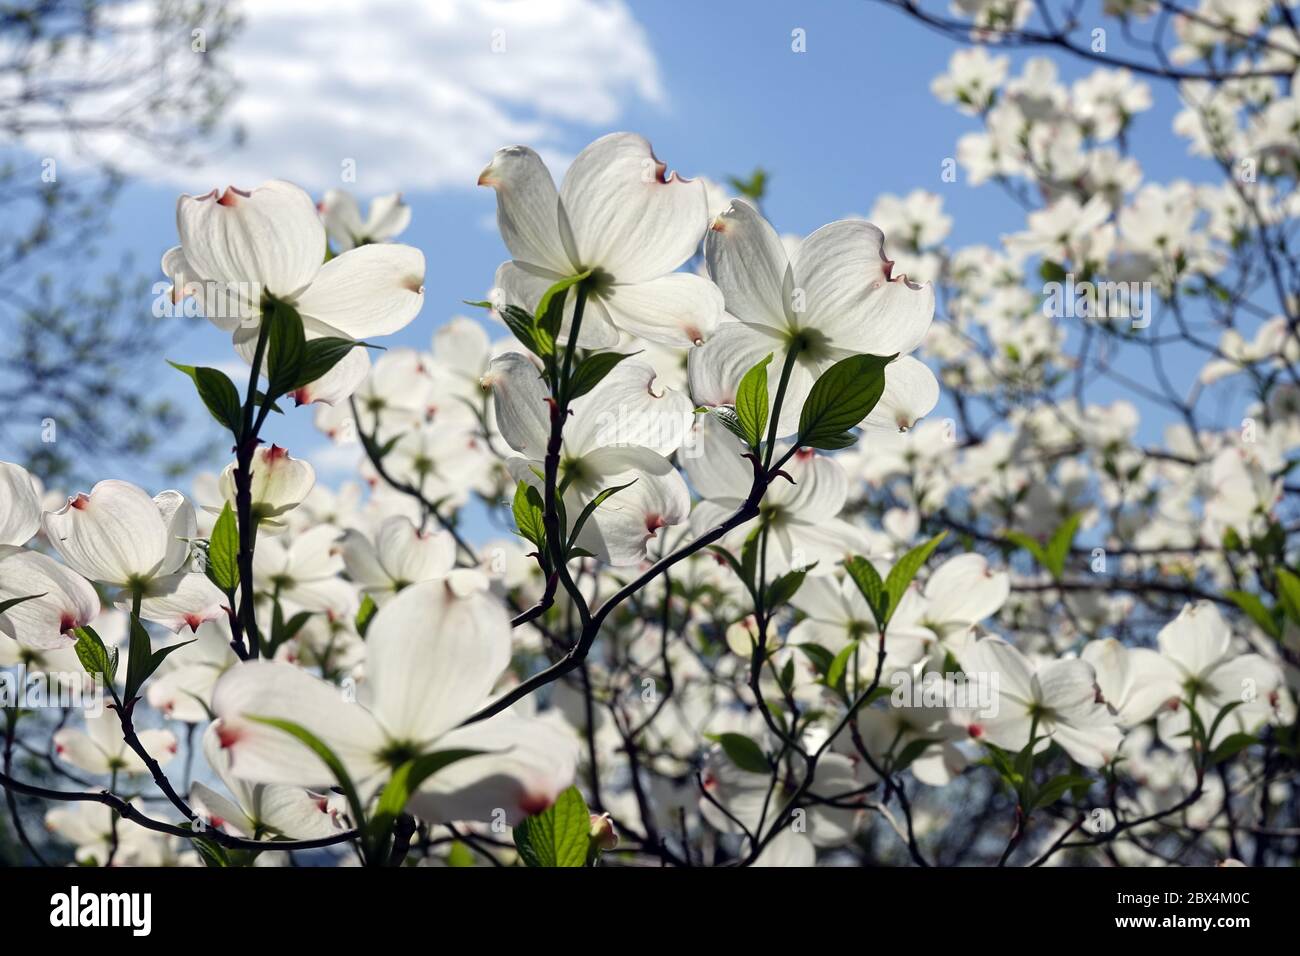 White Flowering Dogwood Tree Cornus florida "White Cloud" Eastern Dogwood Flowers Spring April Blossoms Blooming Branches in Bloom Against Blue Sky Foto Stock